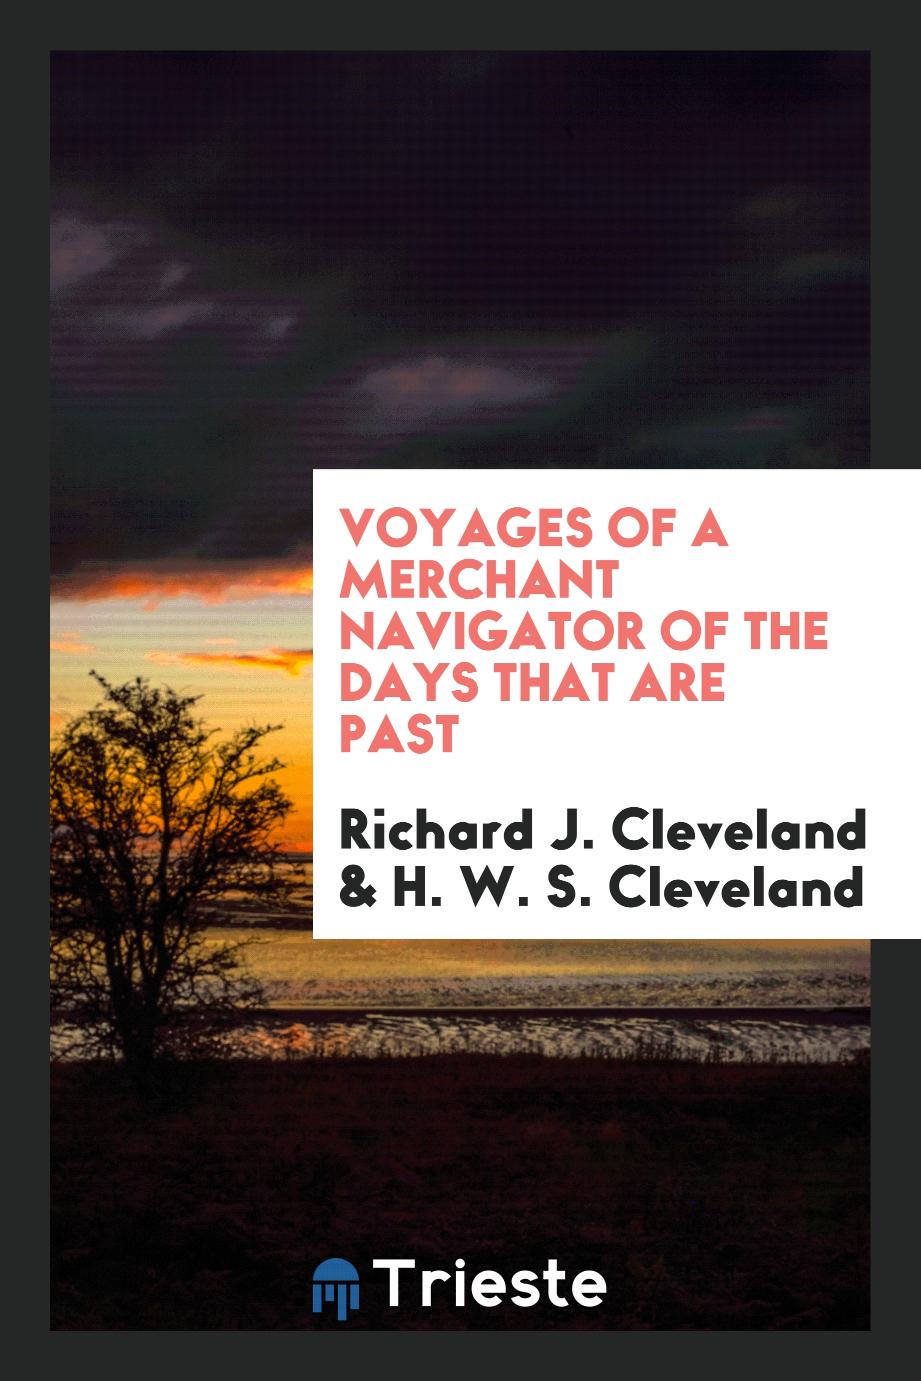 Voyages of a merchant navigator of the days that are past